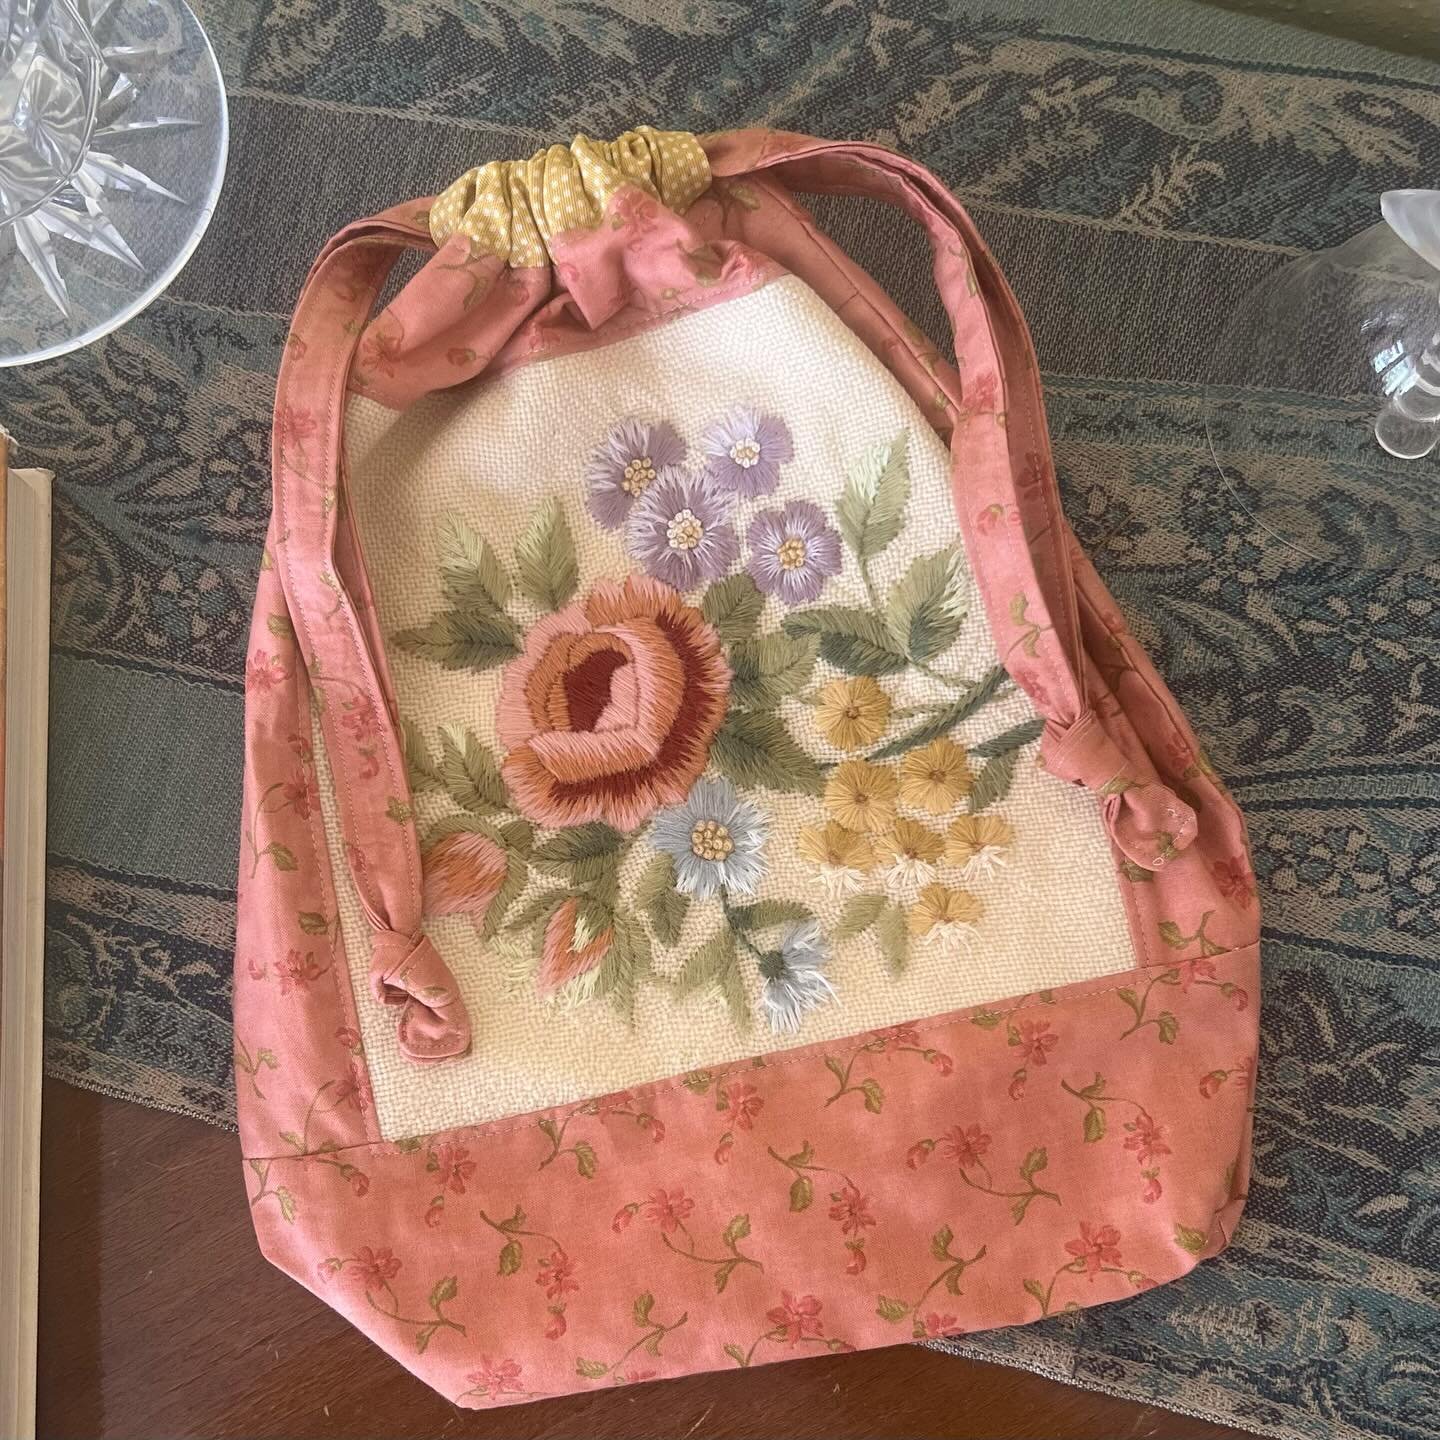 Upcycling- A forgotten hand embroidered cushion my mom made decades ago. I used the center and turned it into a delicate drawstring bag. #upcycling #repurposed #embroideredflowers #drawstringbag